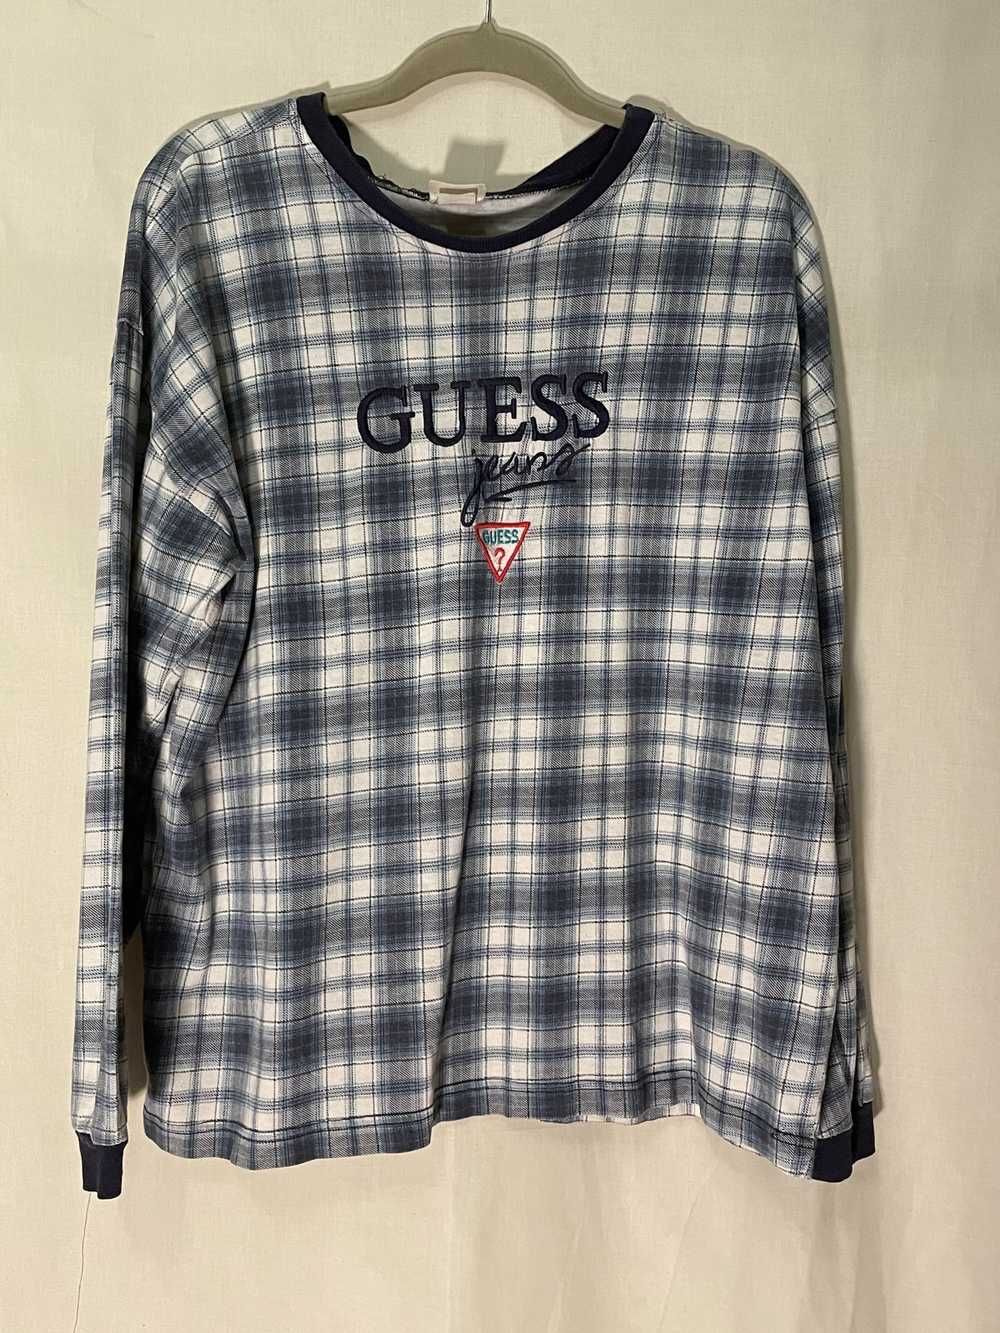 Guess Vintage Guess Longsleeve - image 1